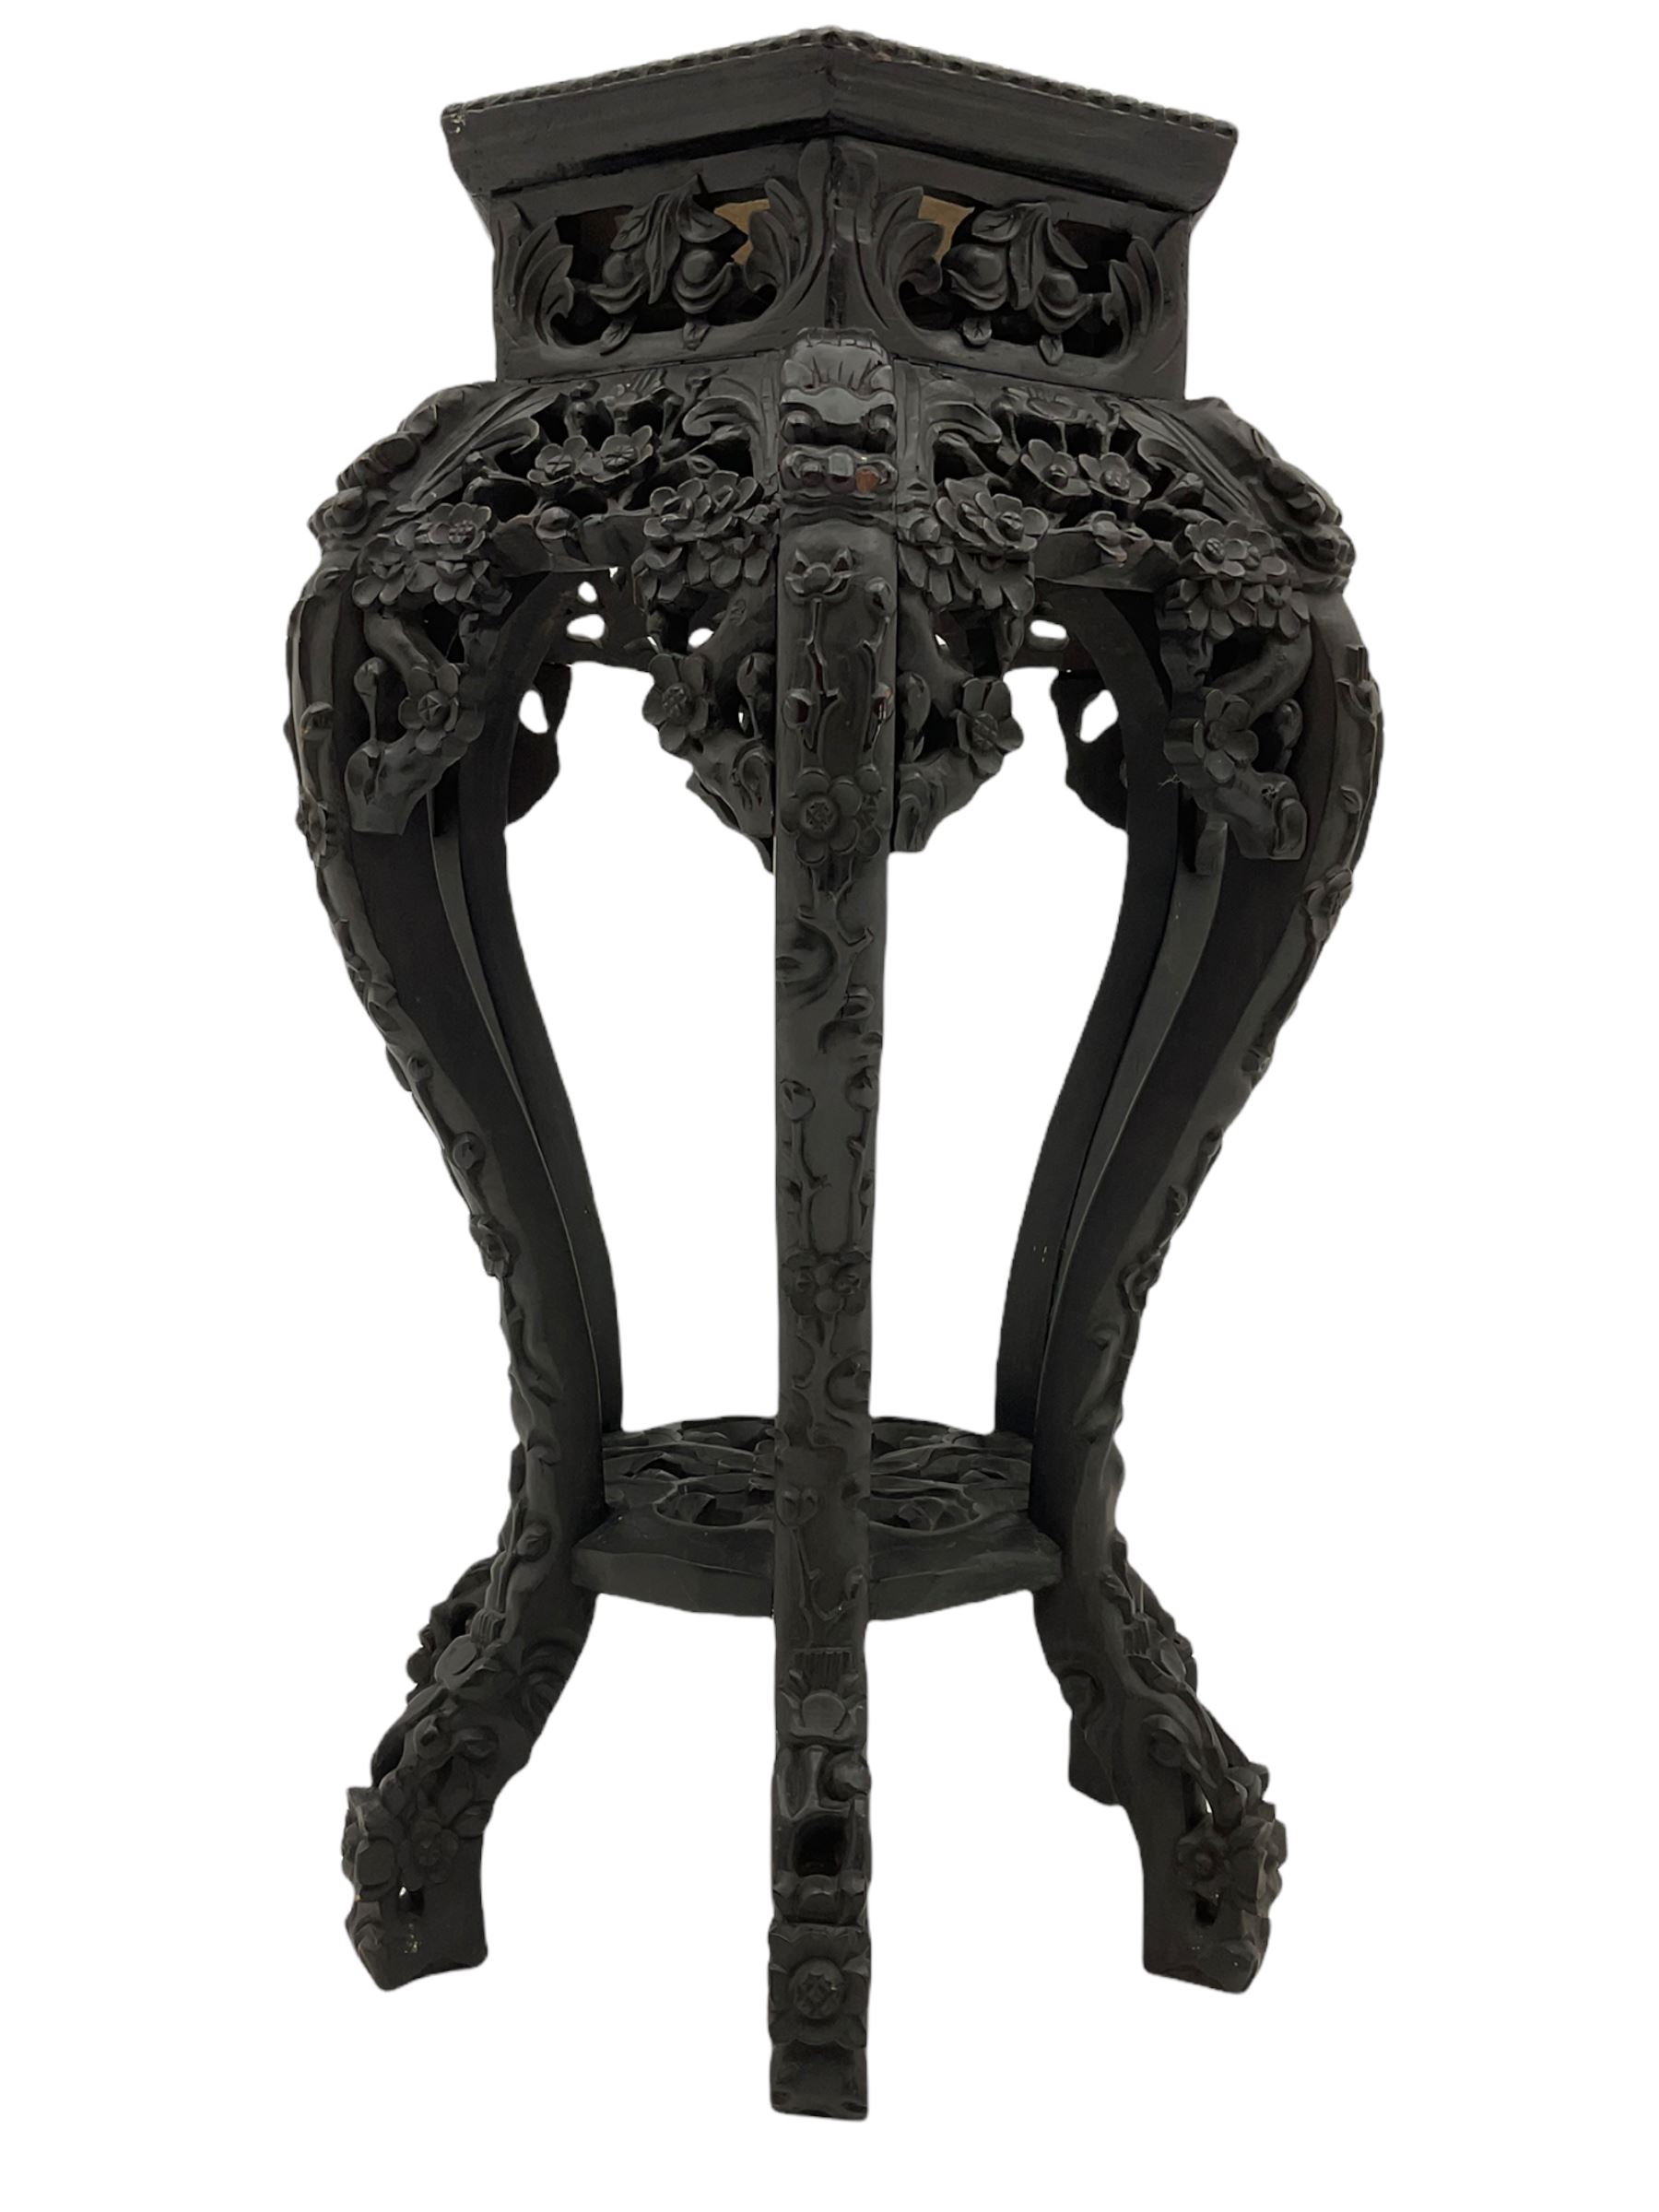 Chinese carved hardwood jardini�re stand - Image 3 of 8